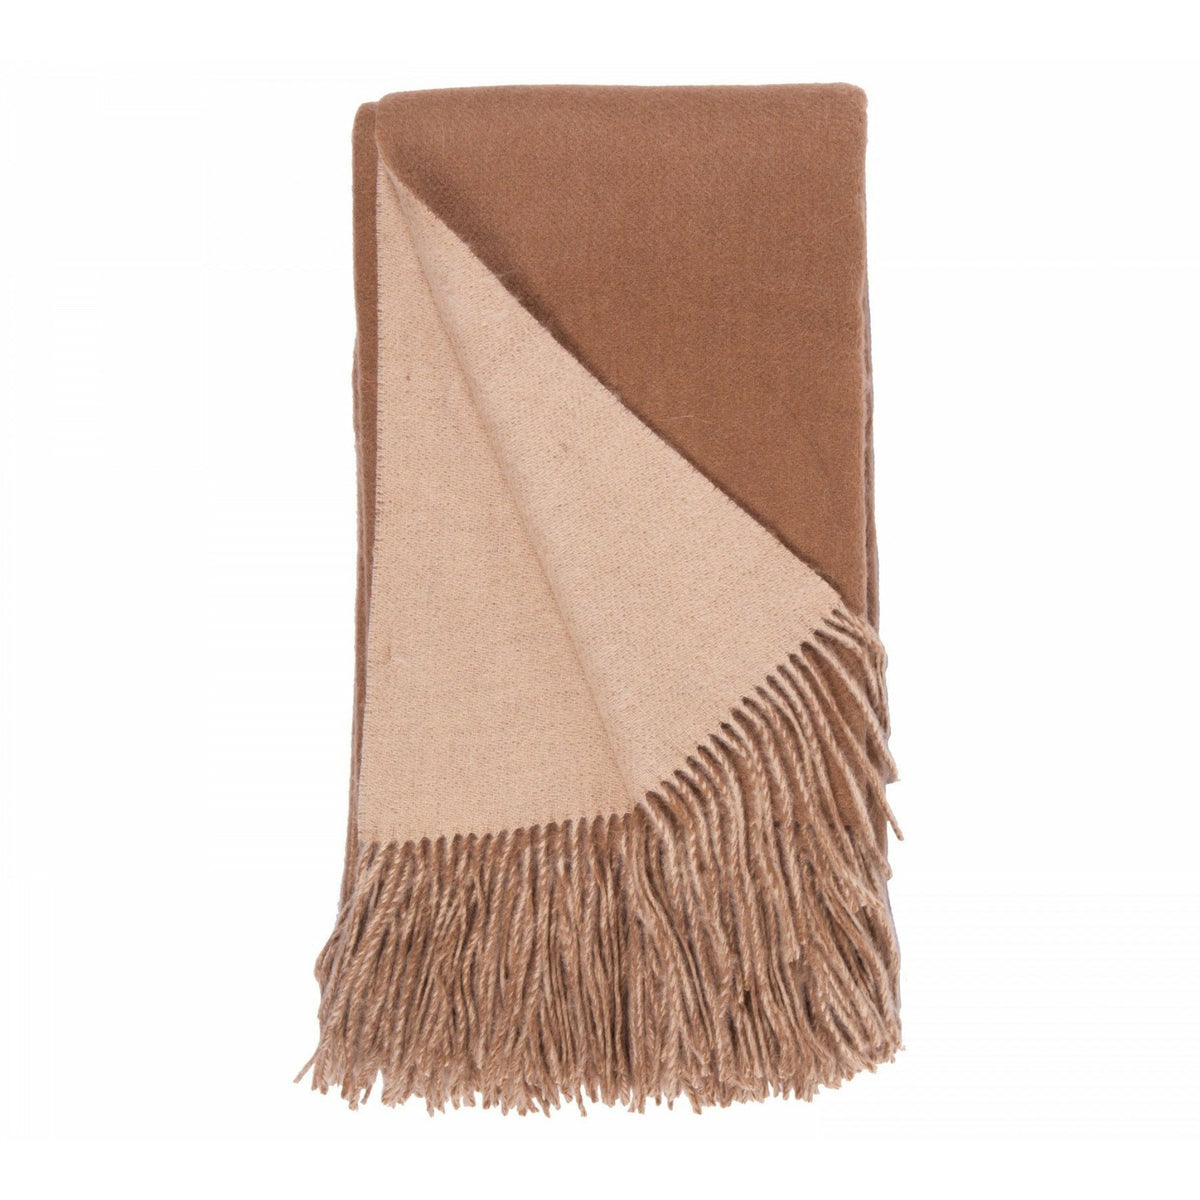 Alashan 100% Cashmere Double Faced Essential Throw Camel/Apricot Fine Linens